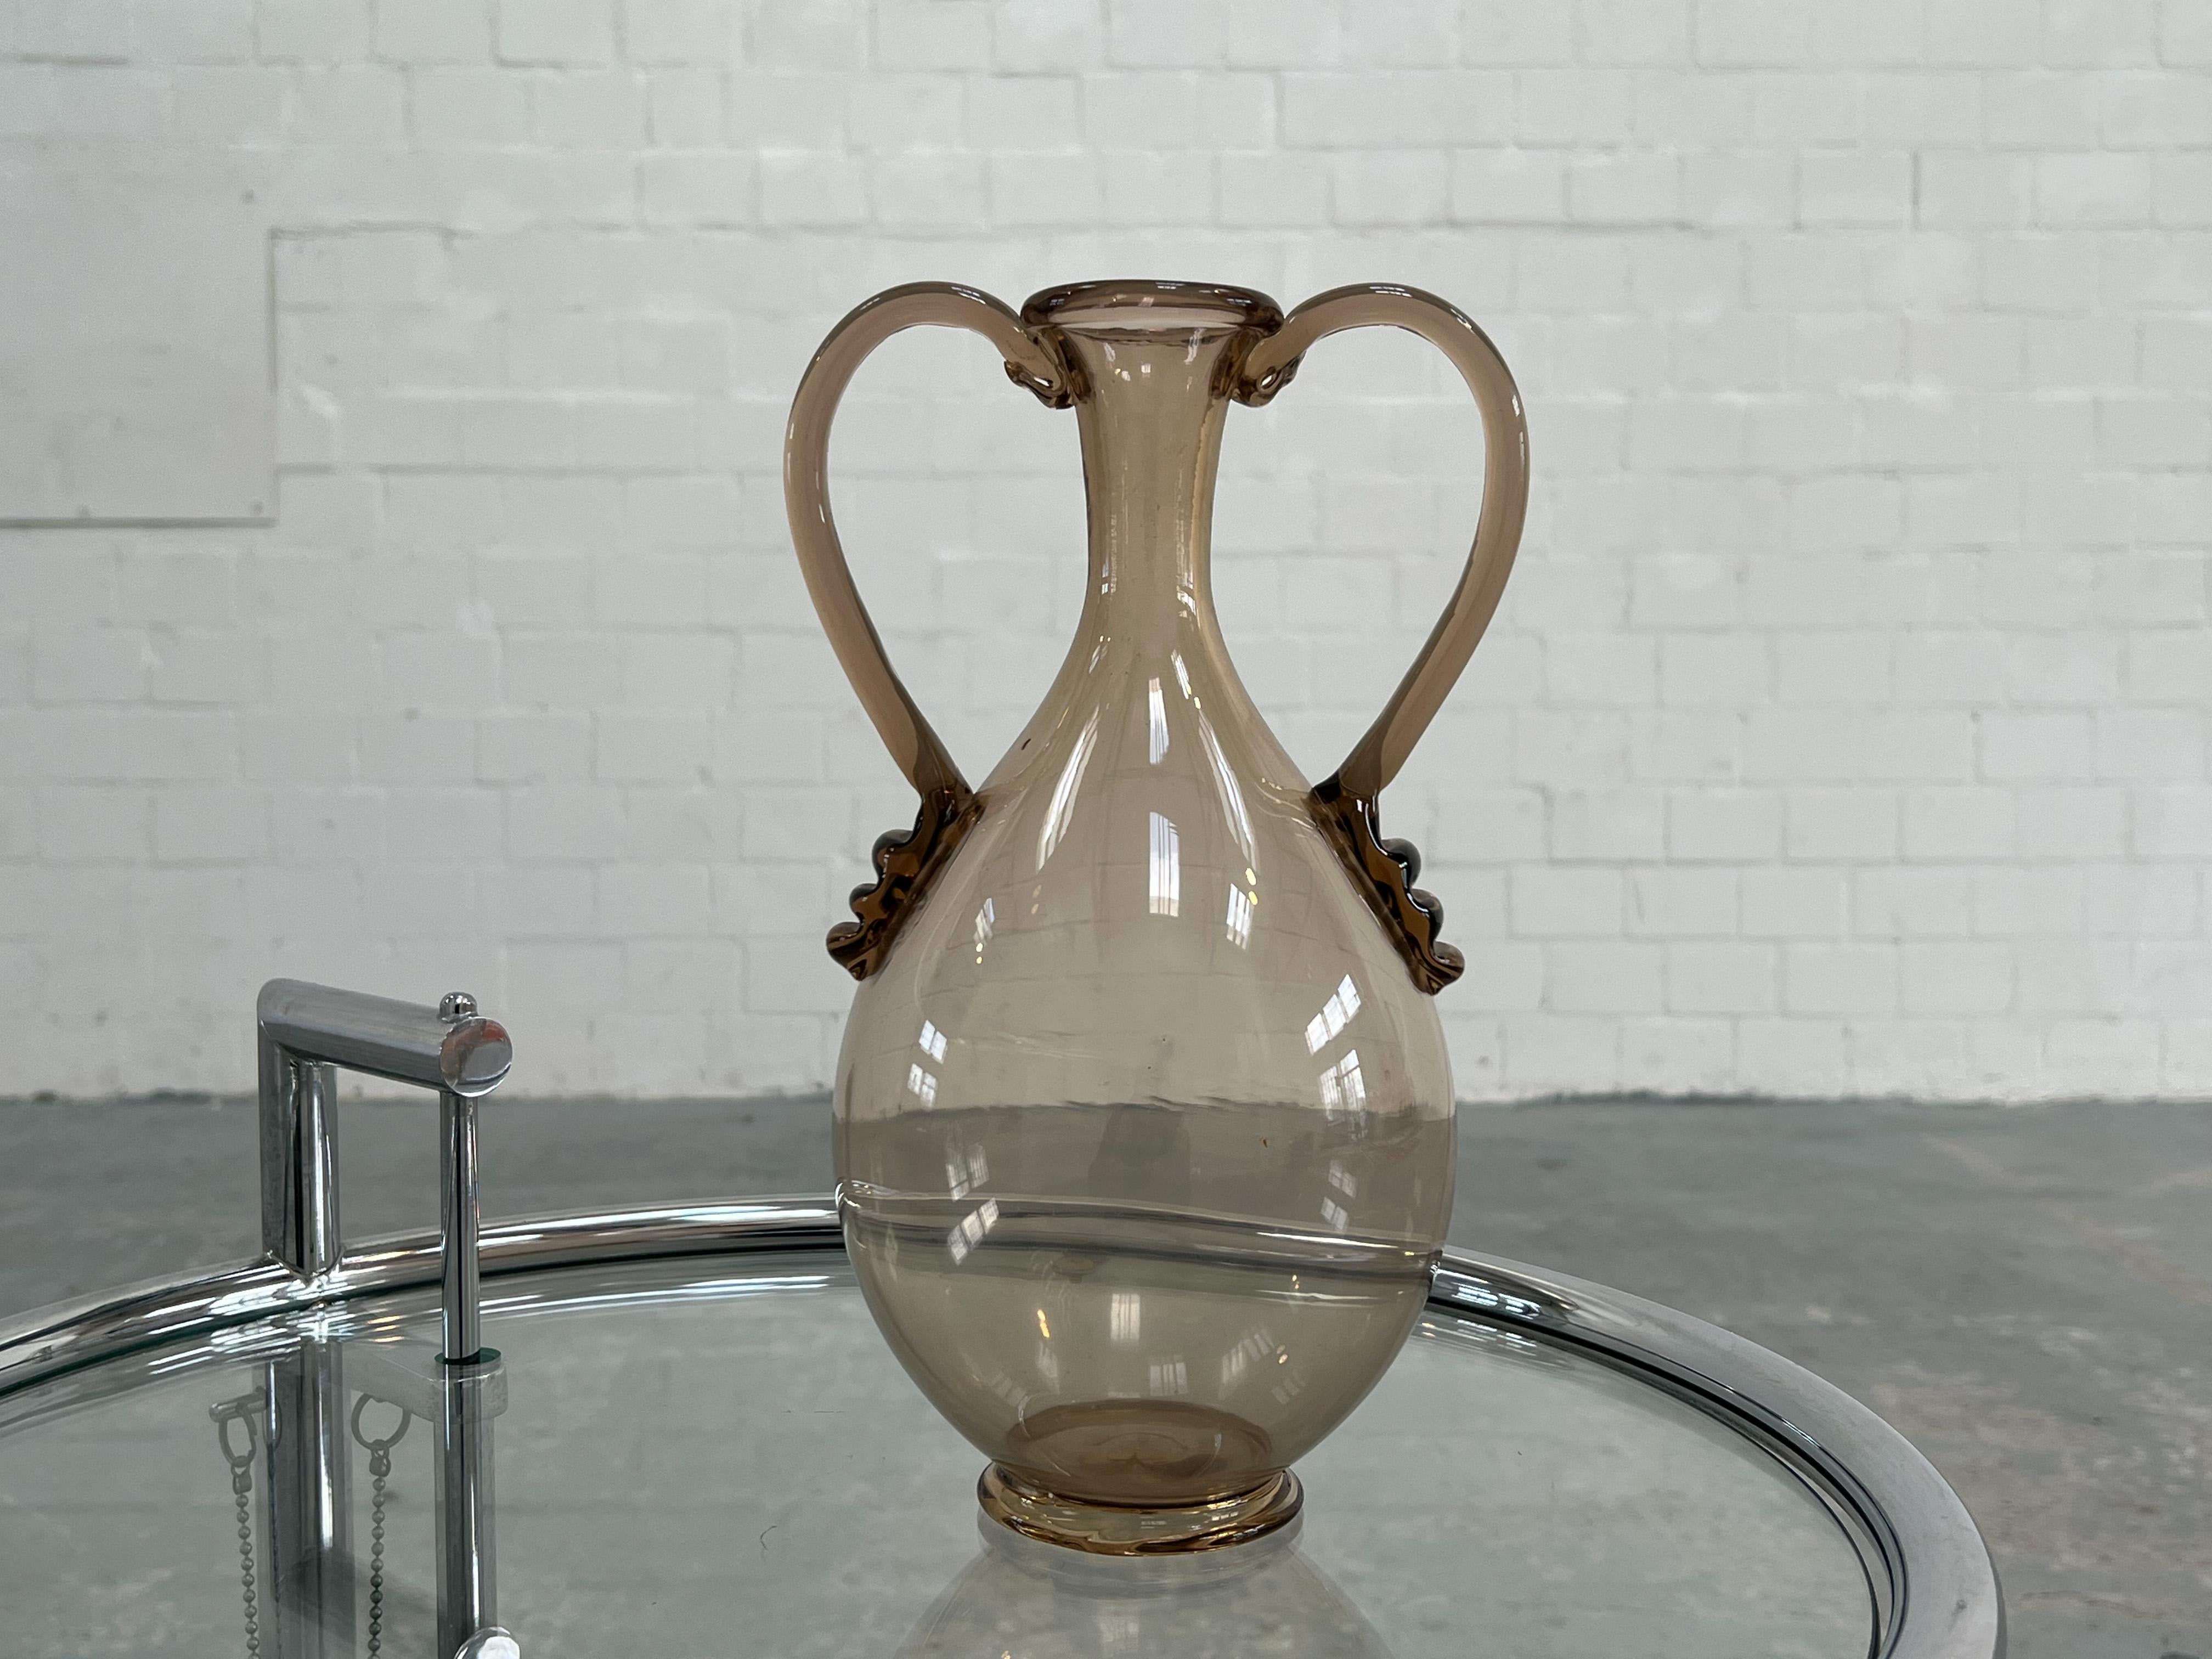 Lightbrown colored blown Murano glass vase, designed
by Vittorio Zecchin in 1921 and made by Venini Murano.
Small mouth that widens towards the base with a
pot-bellied body, wide handles decorated with 